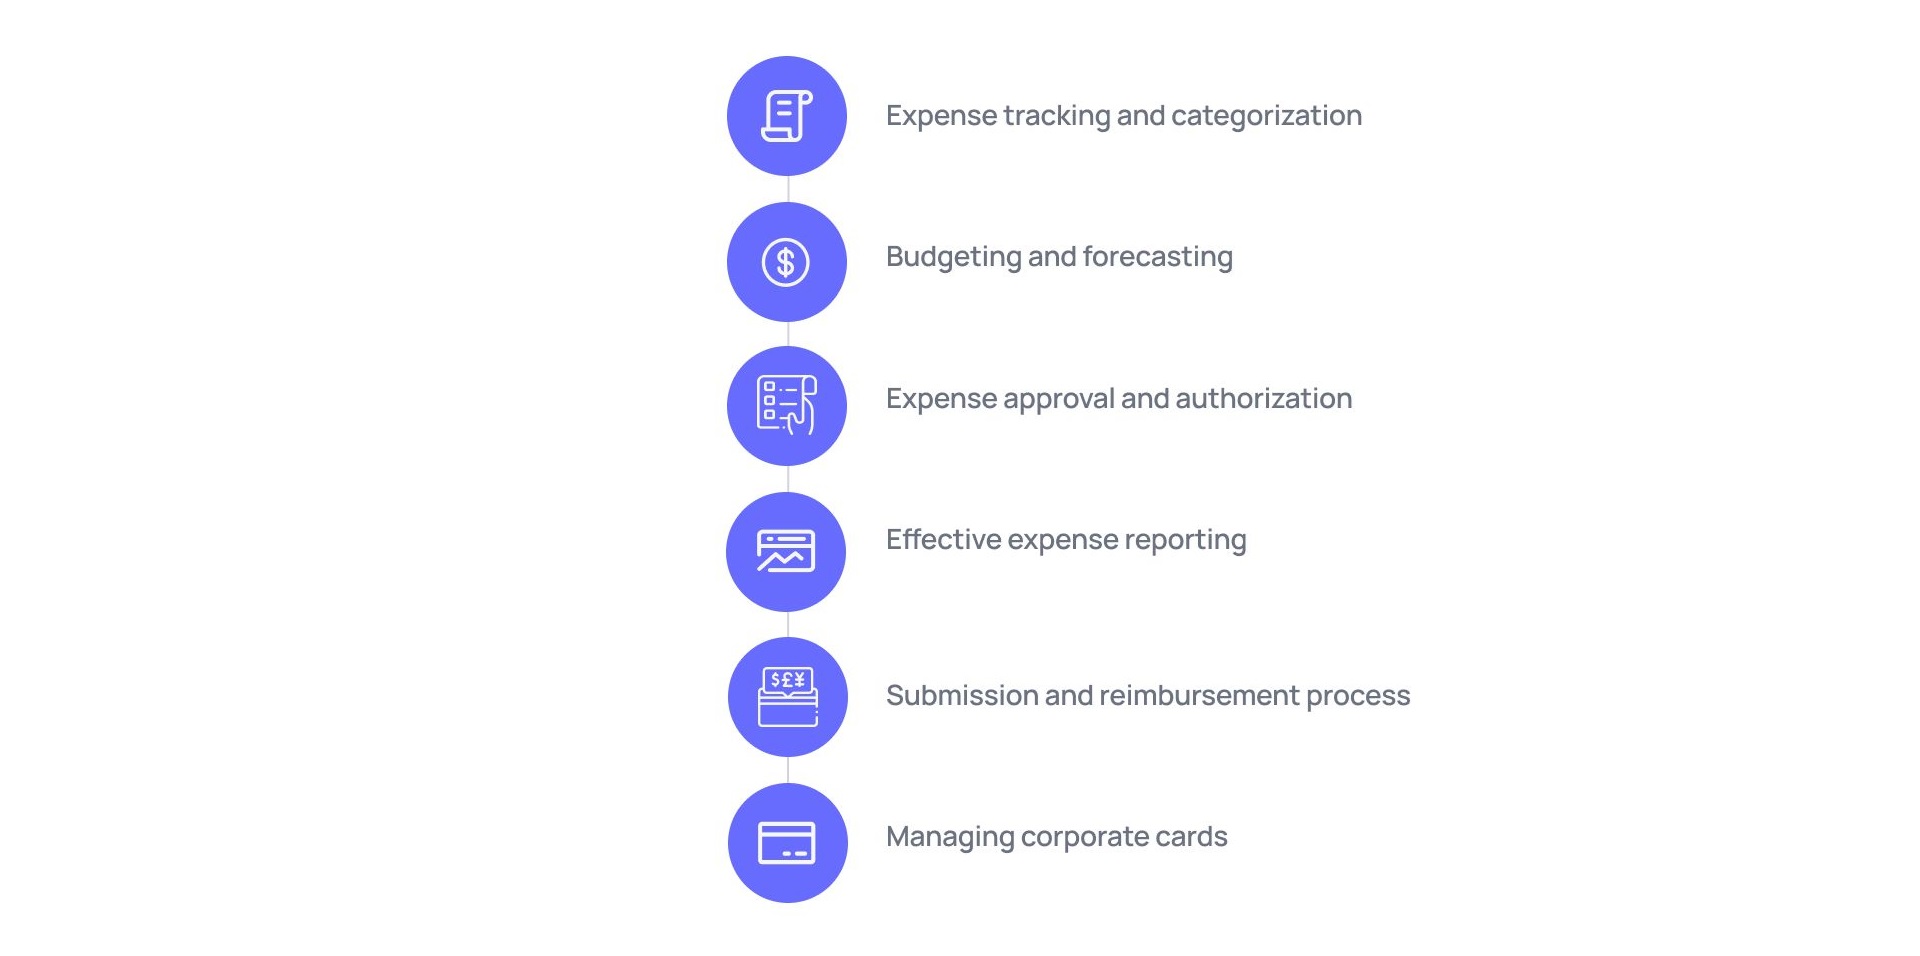 Components of expense management